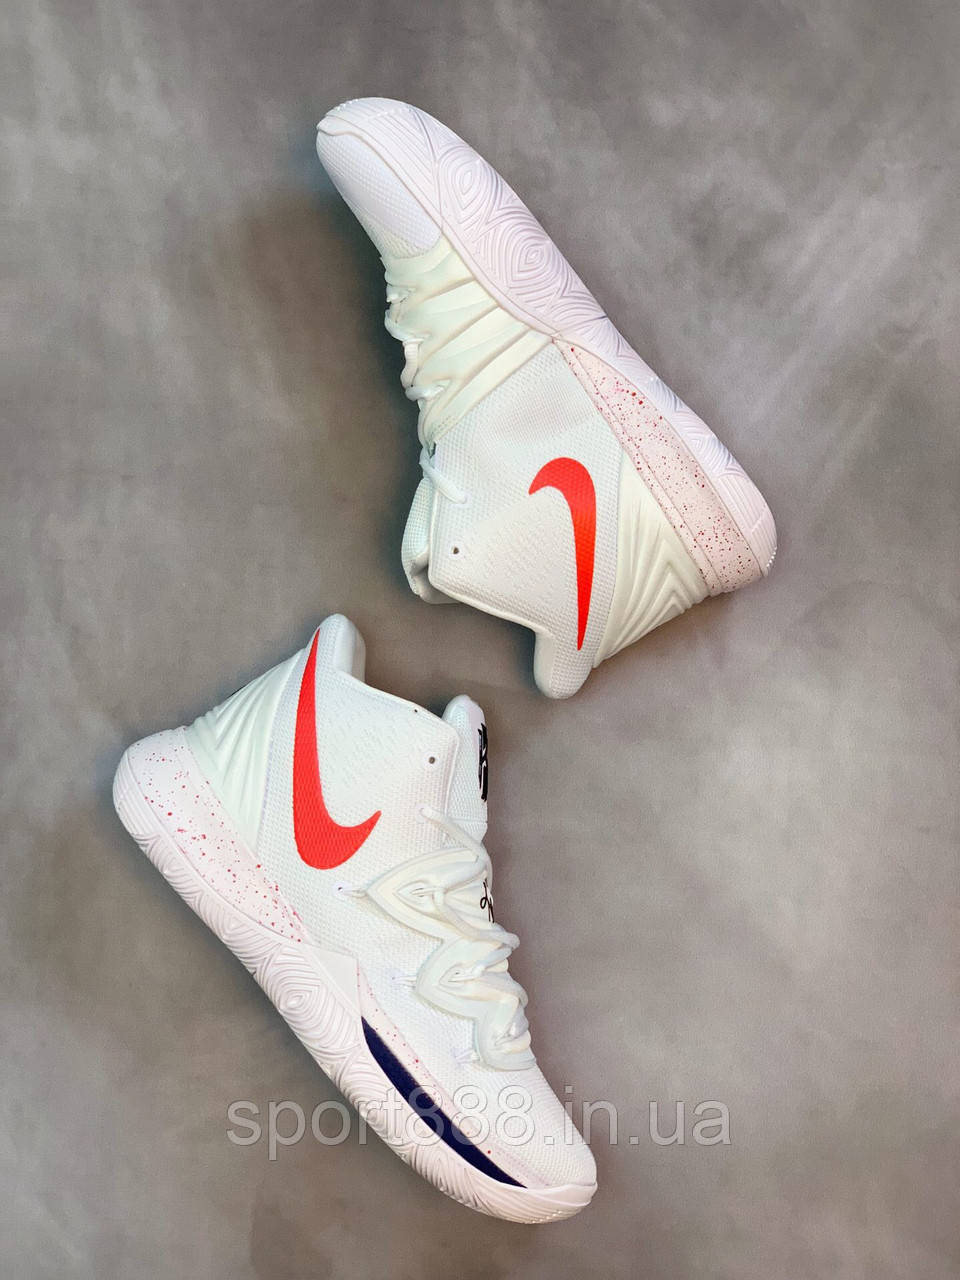 Nike Kyrie 5 Just Do It Black Pink Blue Shoes 4 Pinterest